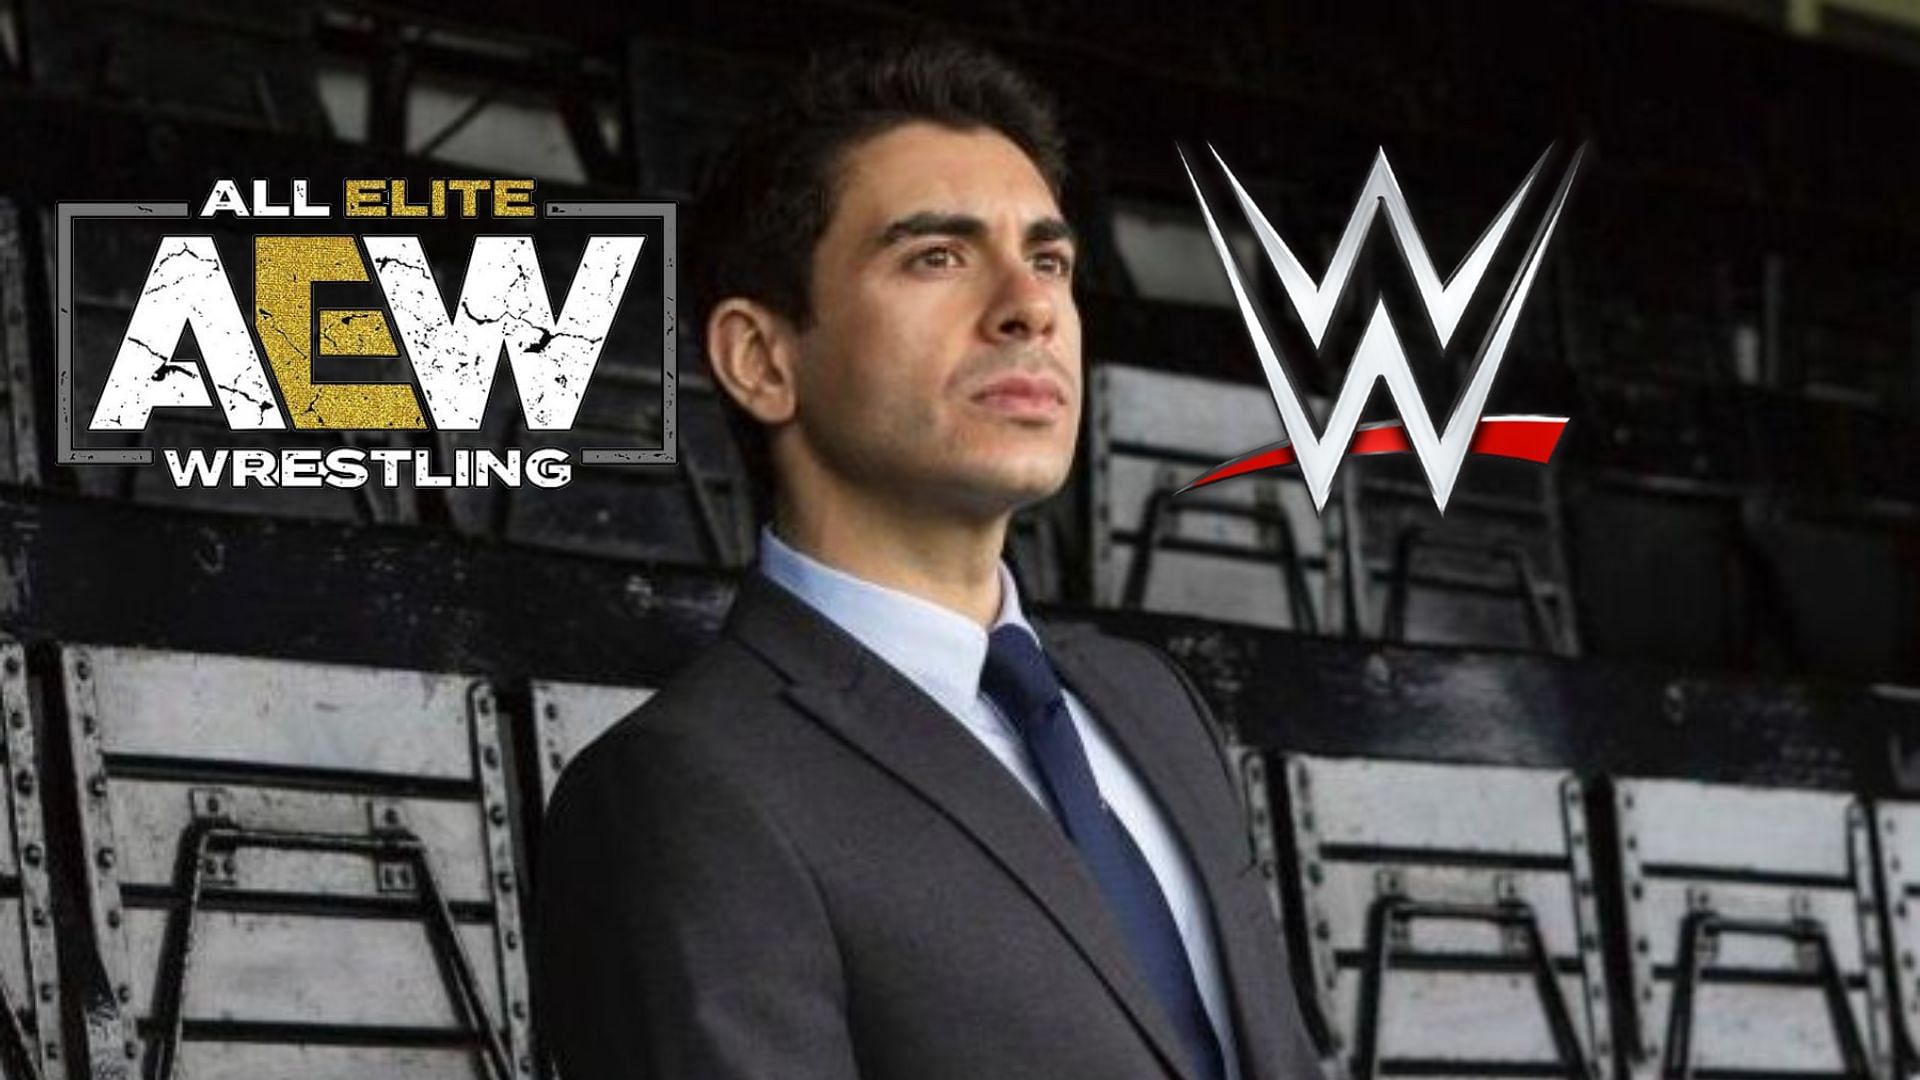 AEW President Tony Khan has signed numerous former WWE Superstars to his company.